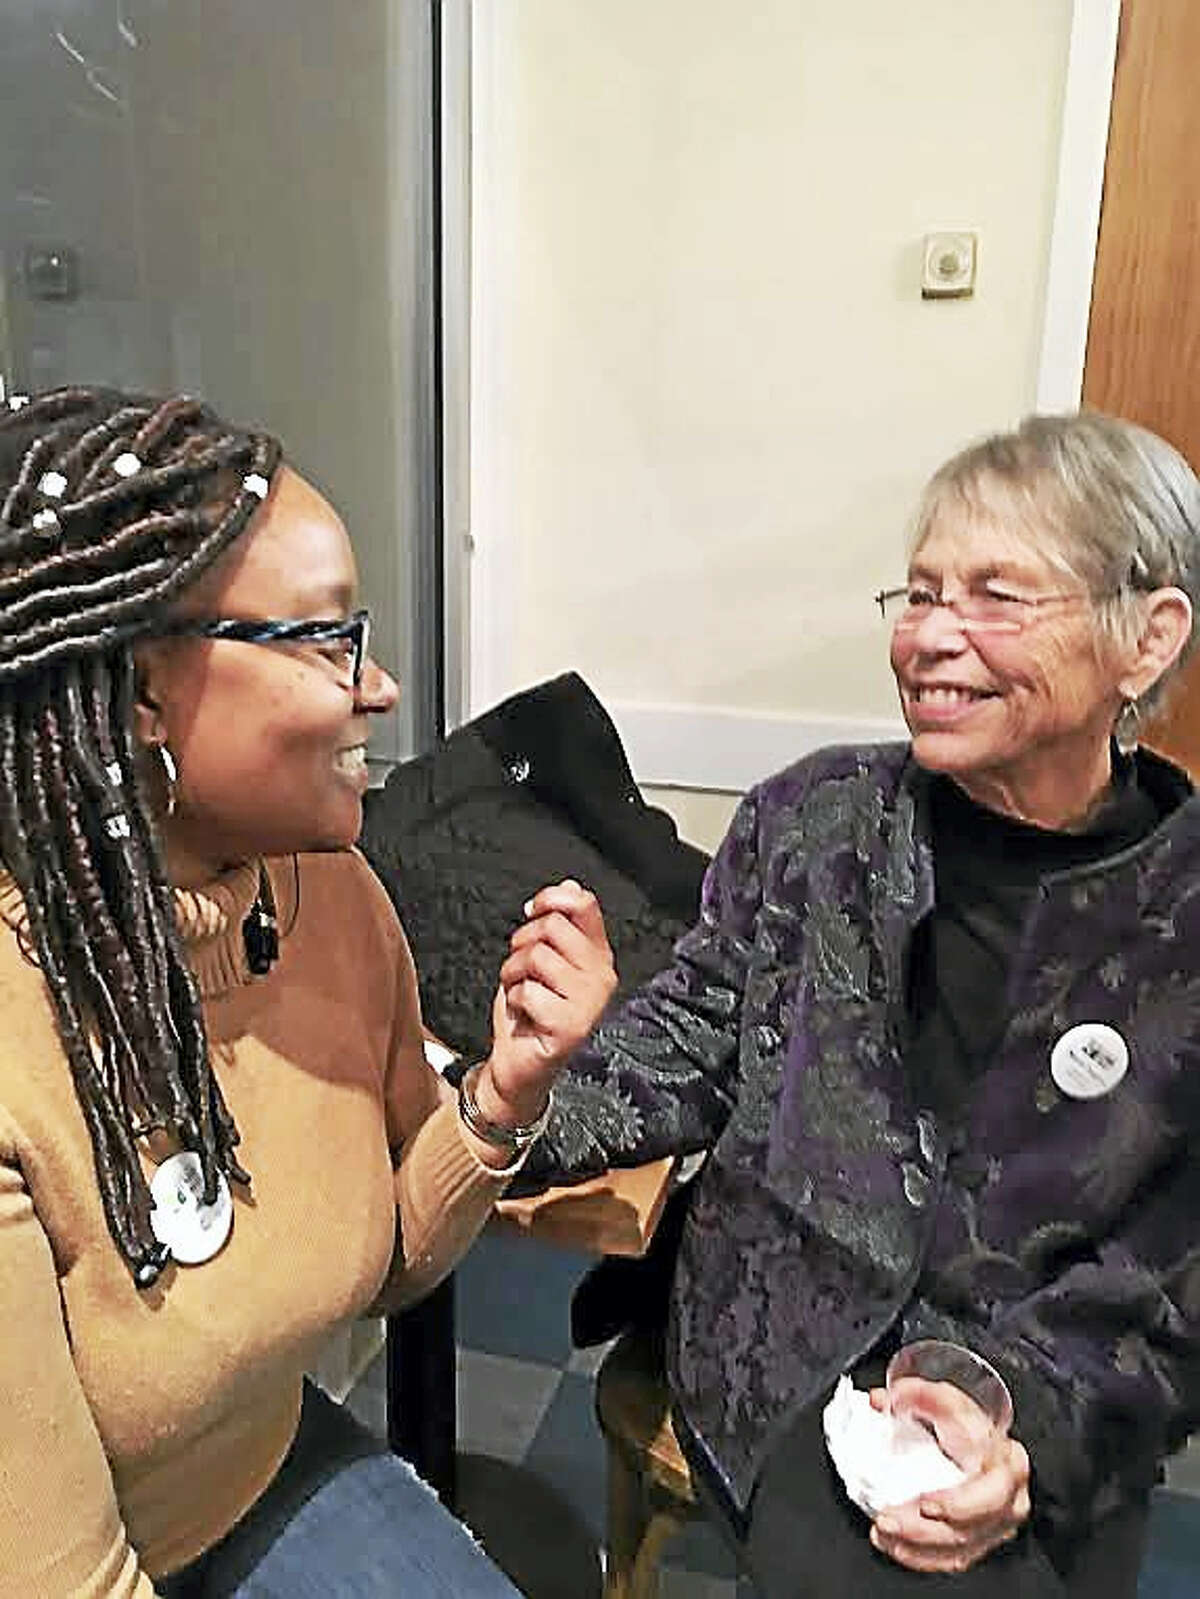 Tyra Pendergrass, left, and Marie Tupper, both members of the New Haven Land Trust board, get to know each other better at a celebration Wednesday marking the partnership with Schooner Inc.